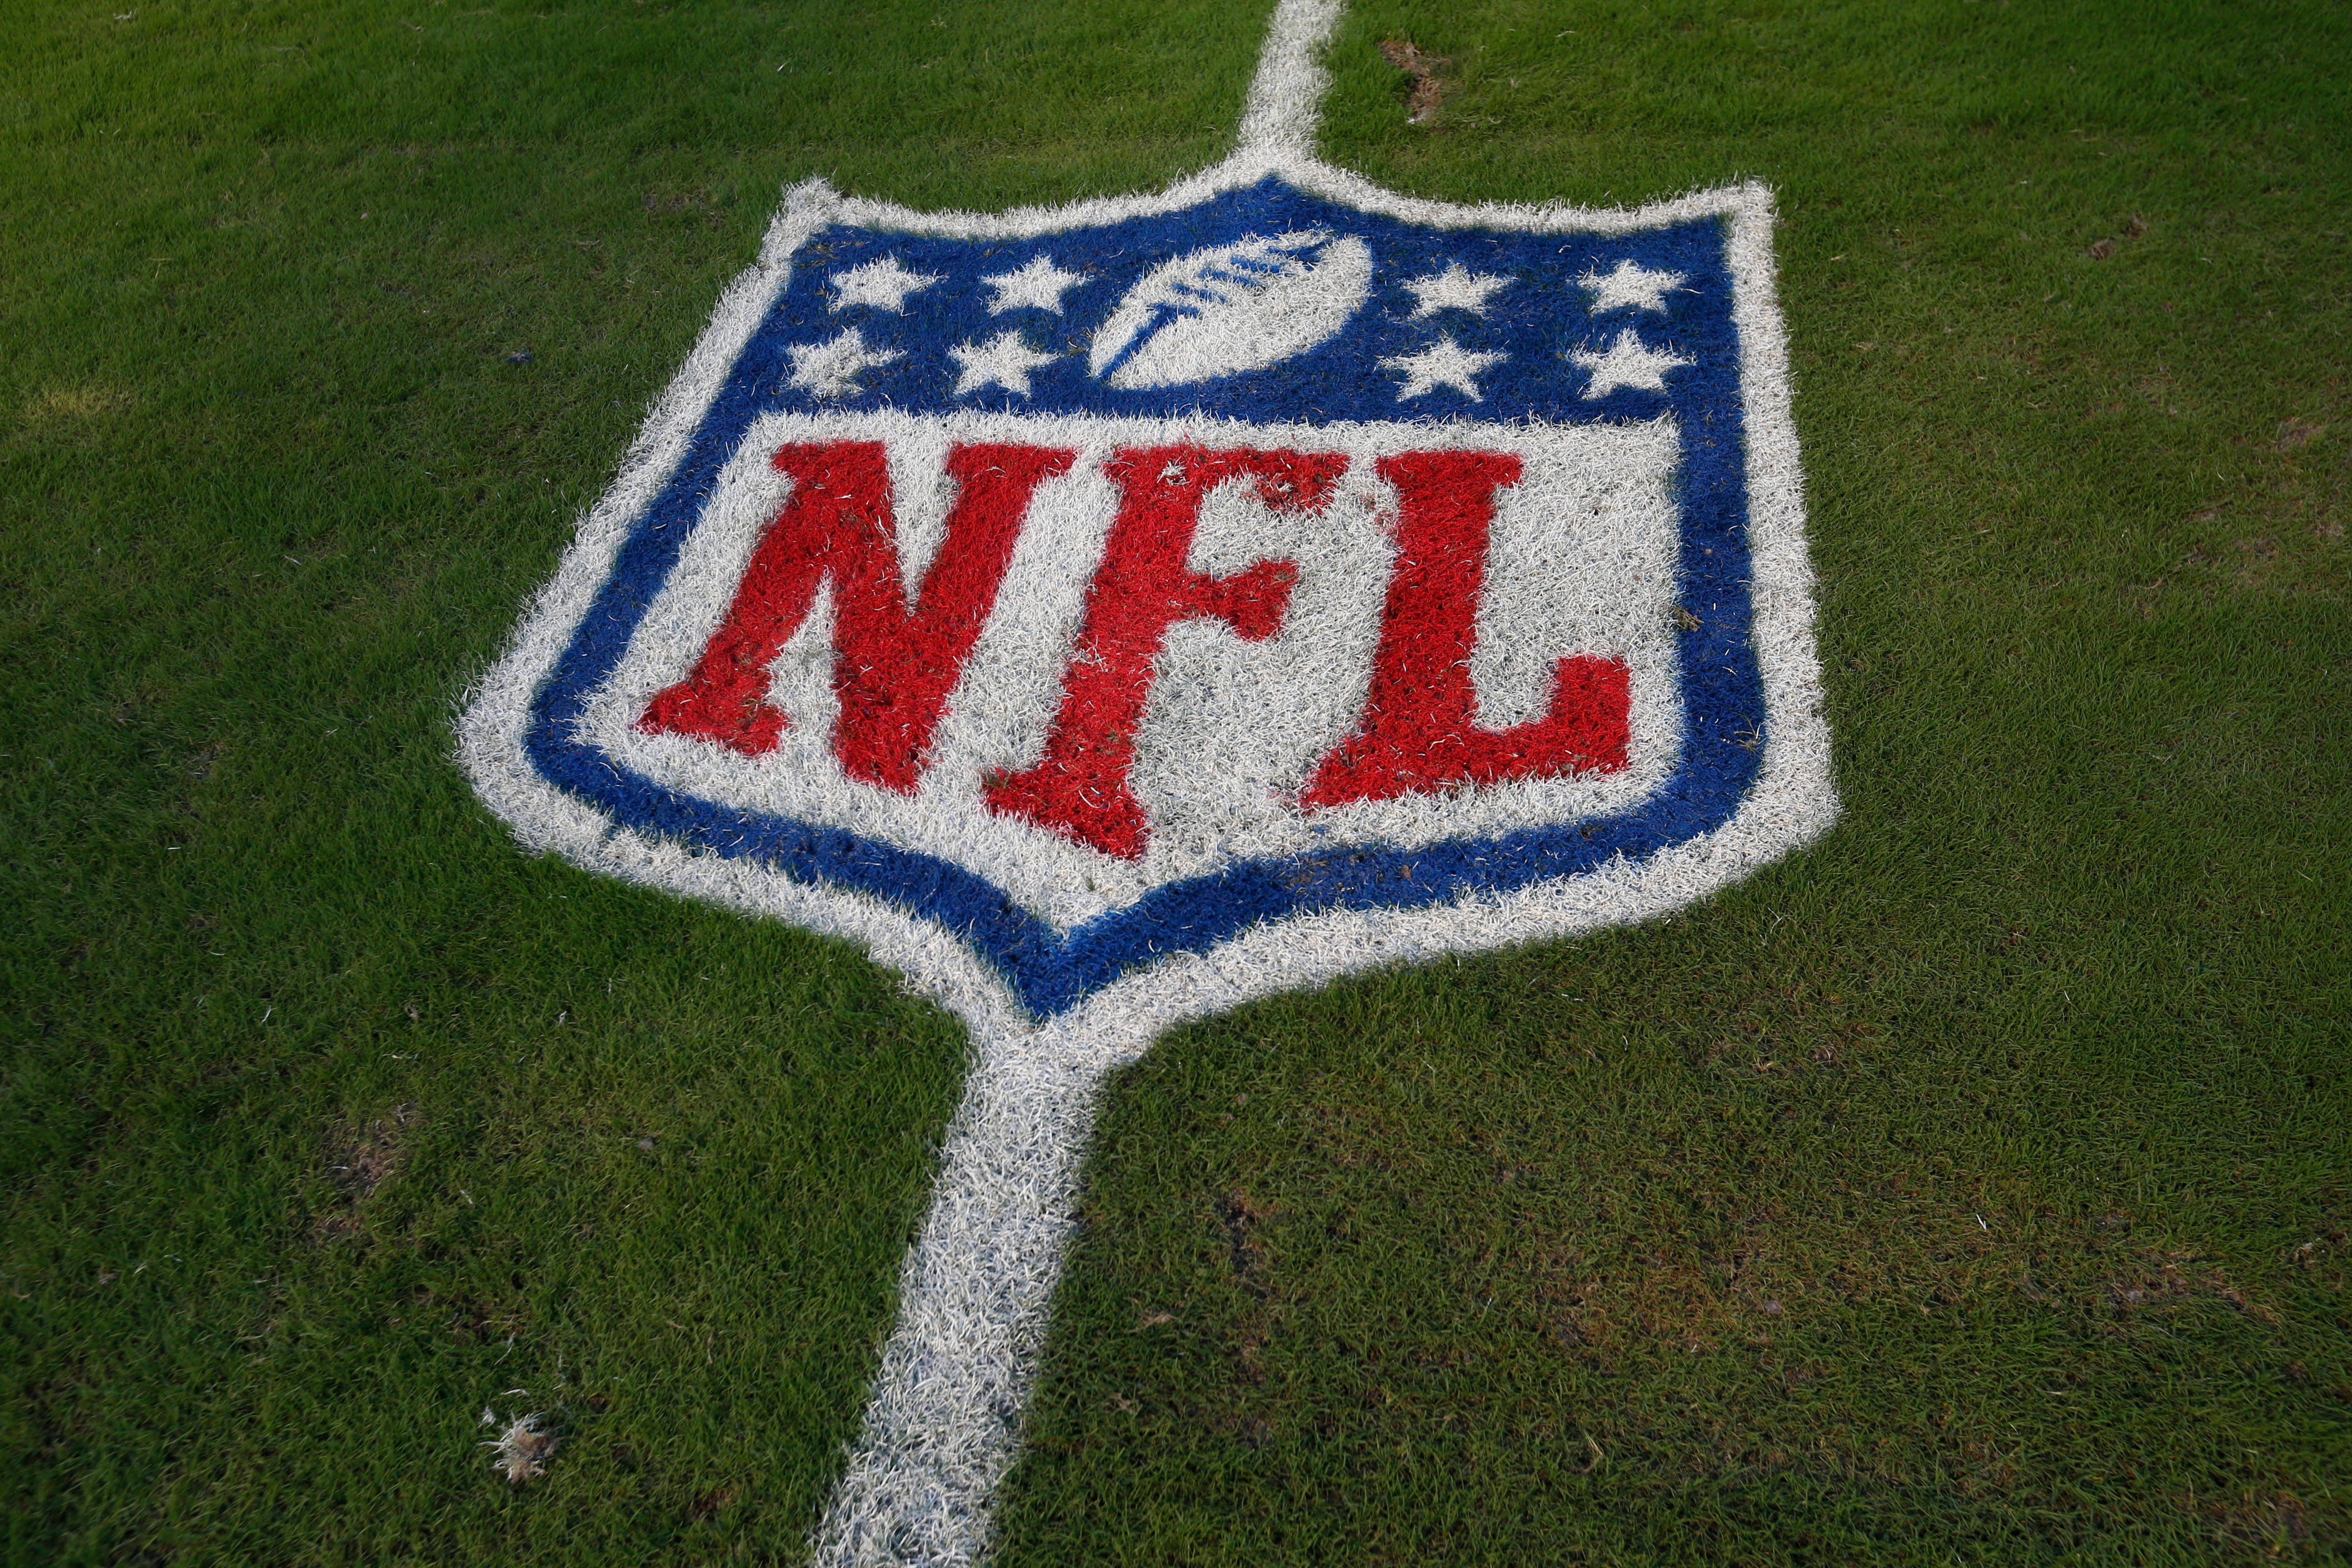 NFL, players plan further talks on social issues after &apos;productive&apos; meeting